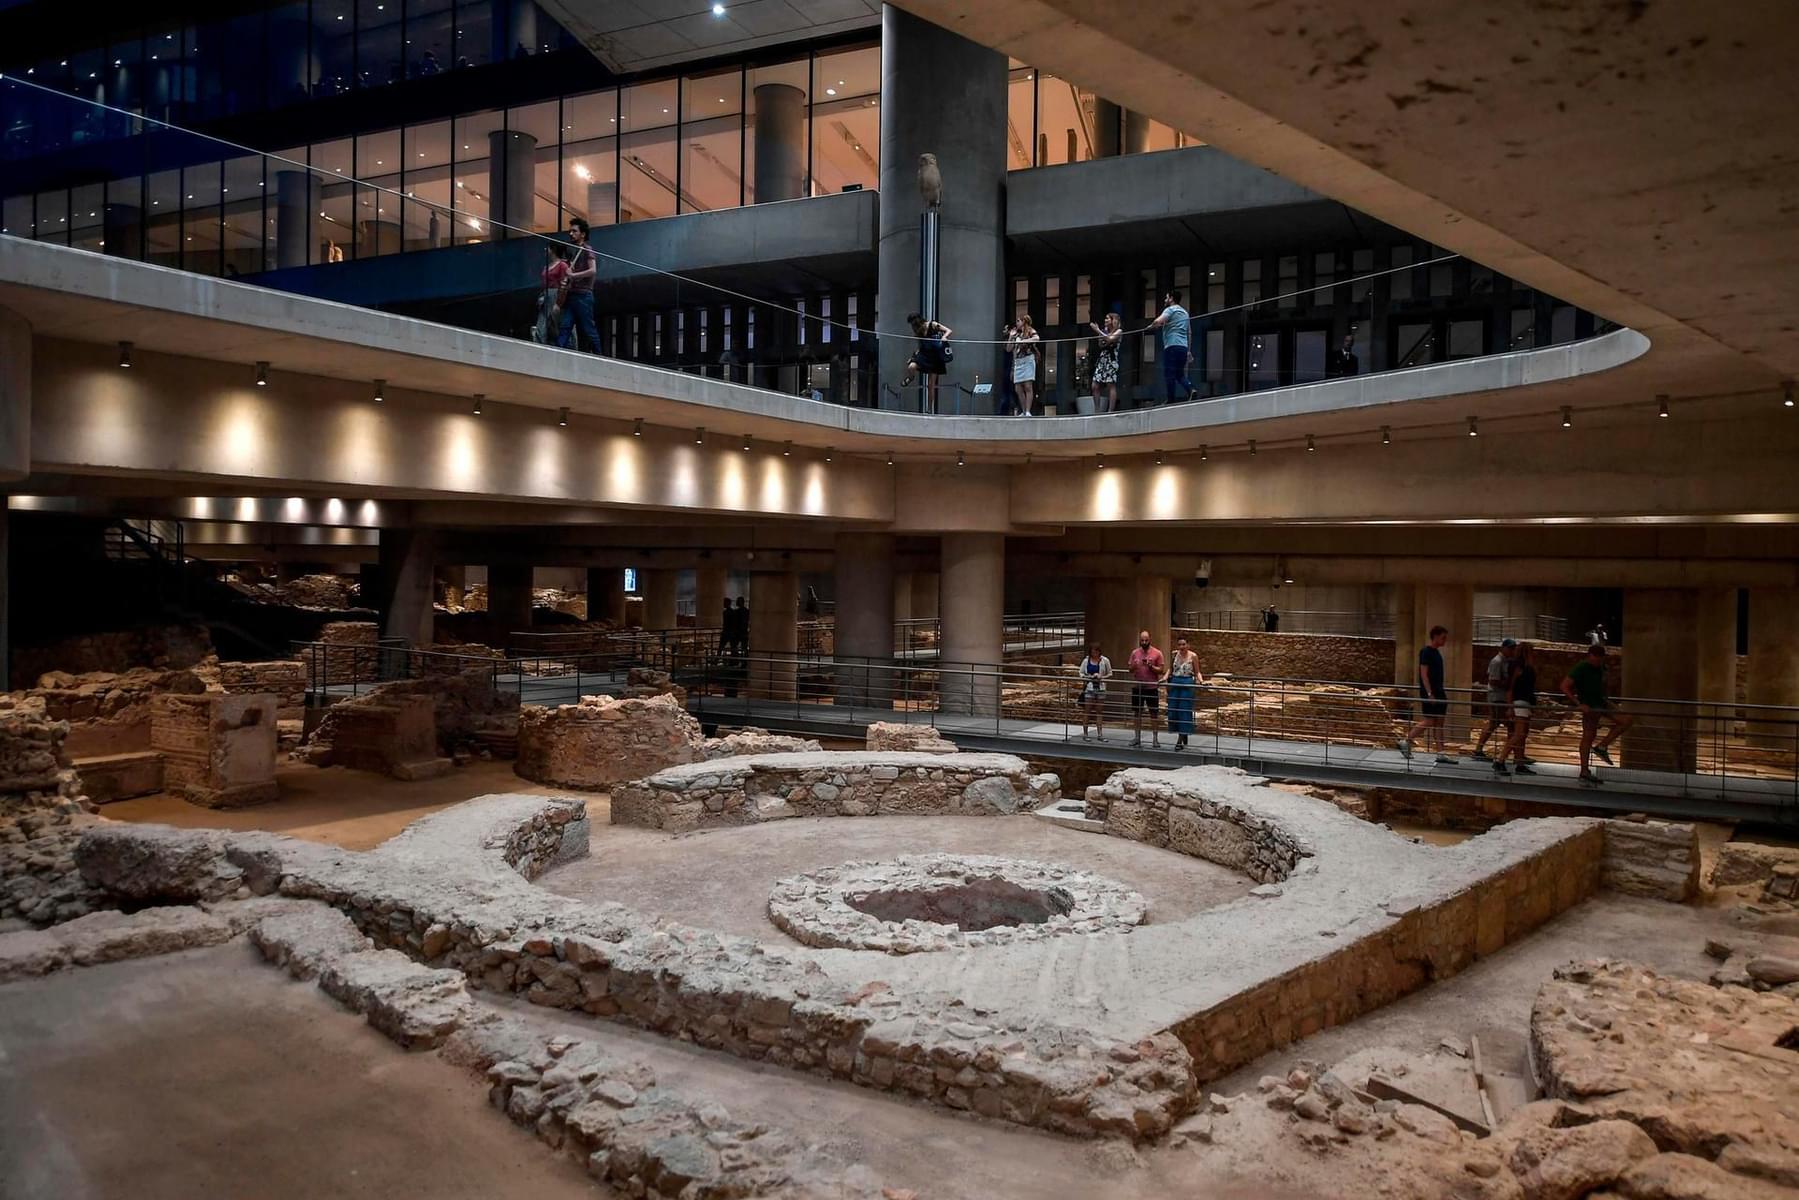 Look at the archaeological excavation in the museum